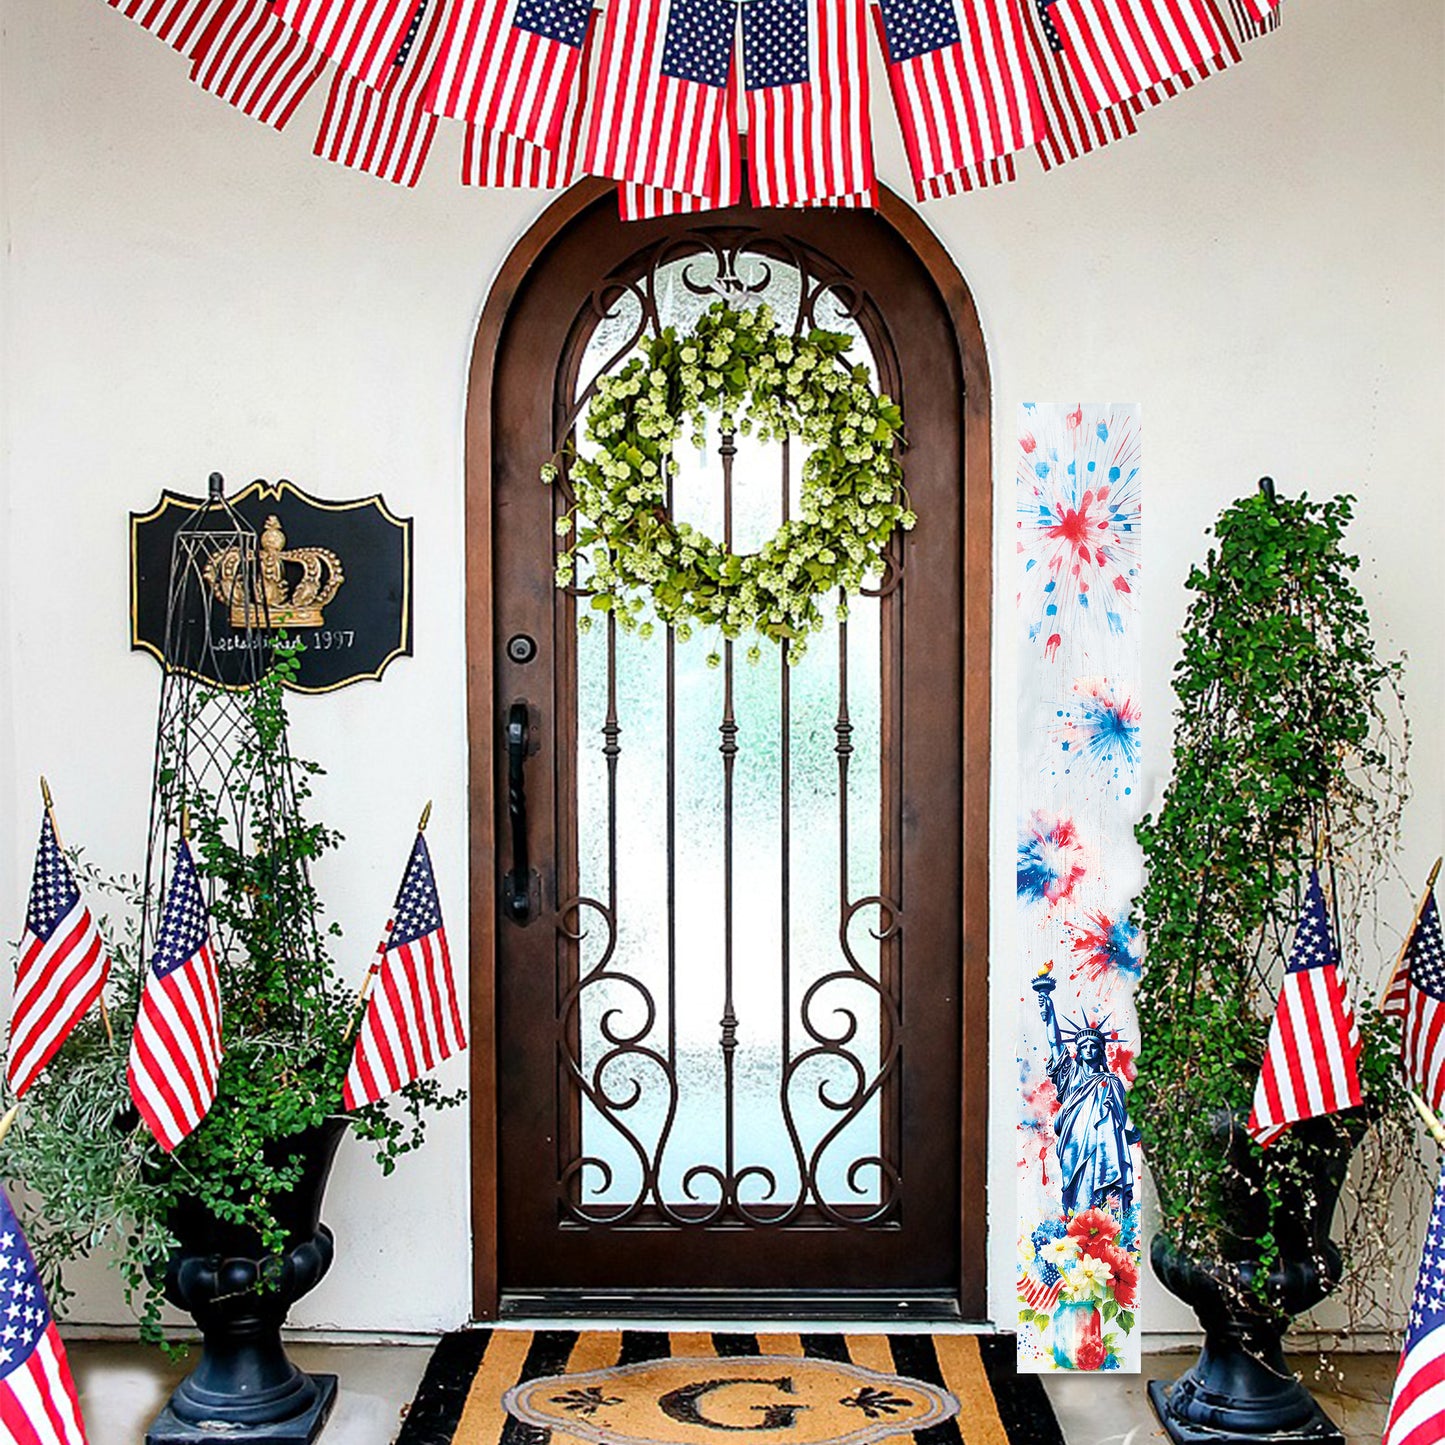 72in 4th of July Patriotic Wooden Porch Decor | Firework Designs | Independence Day Outdoor Decor